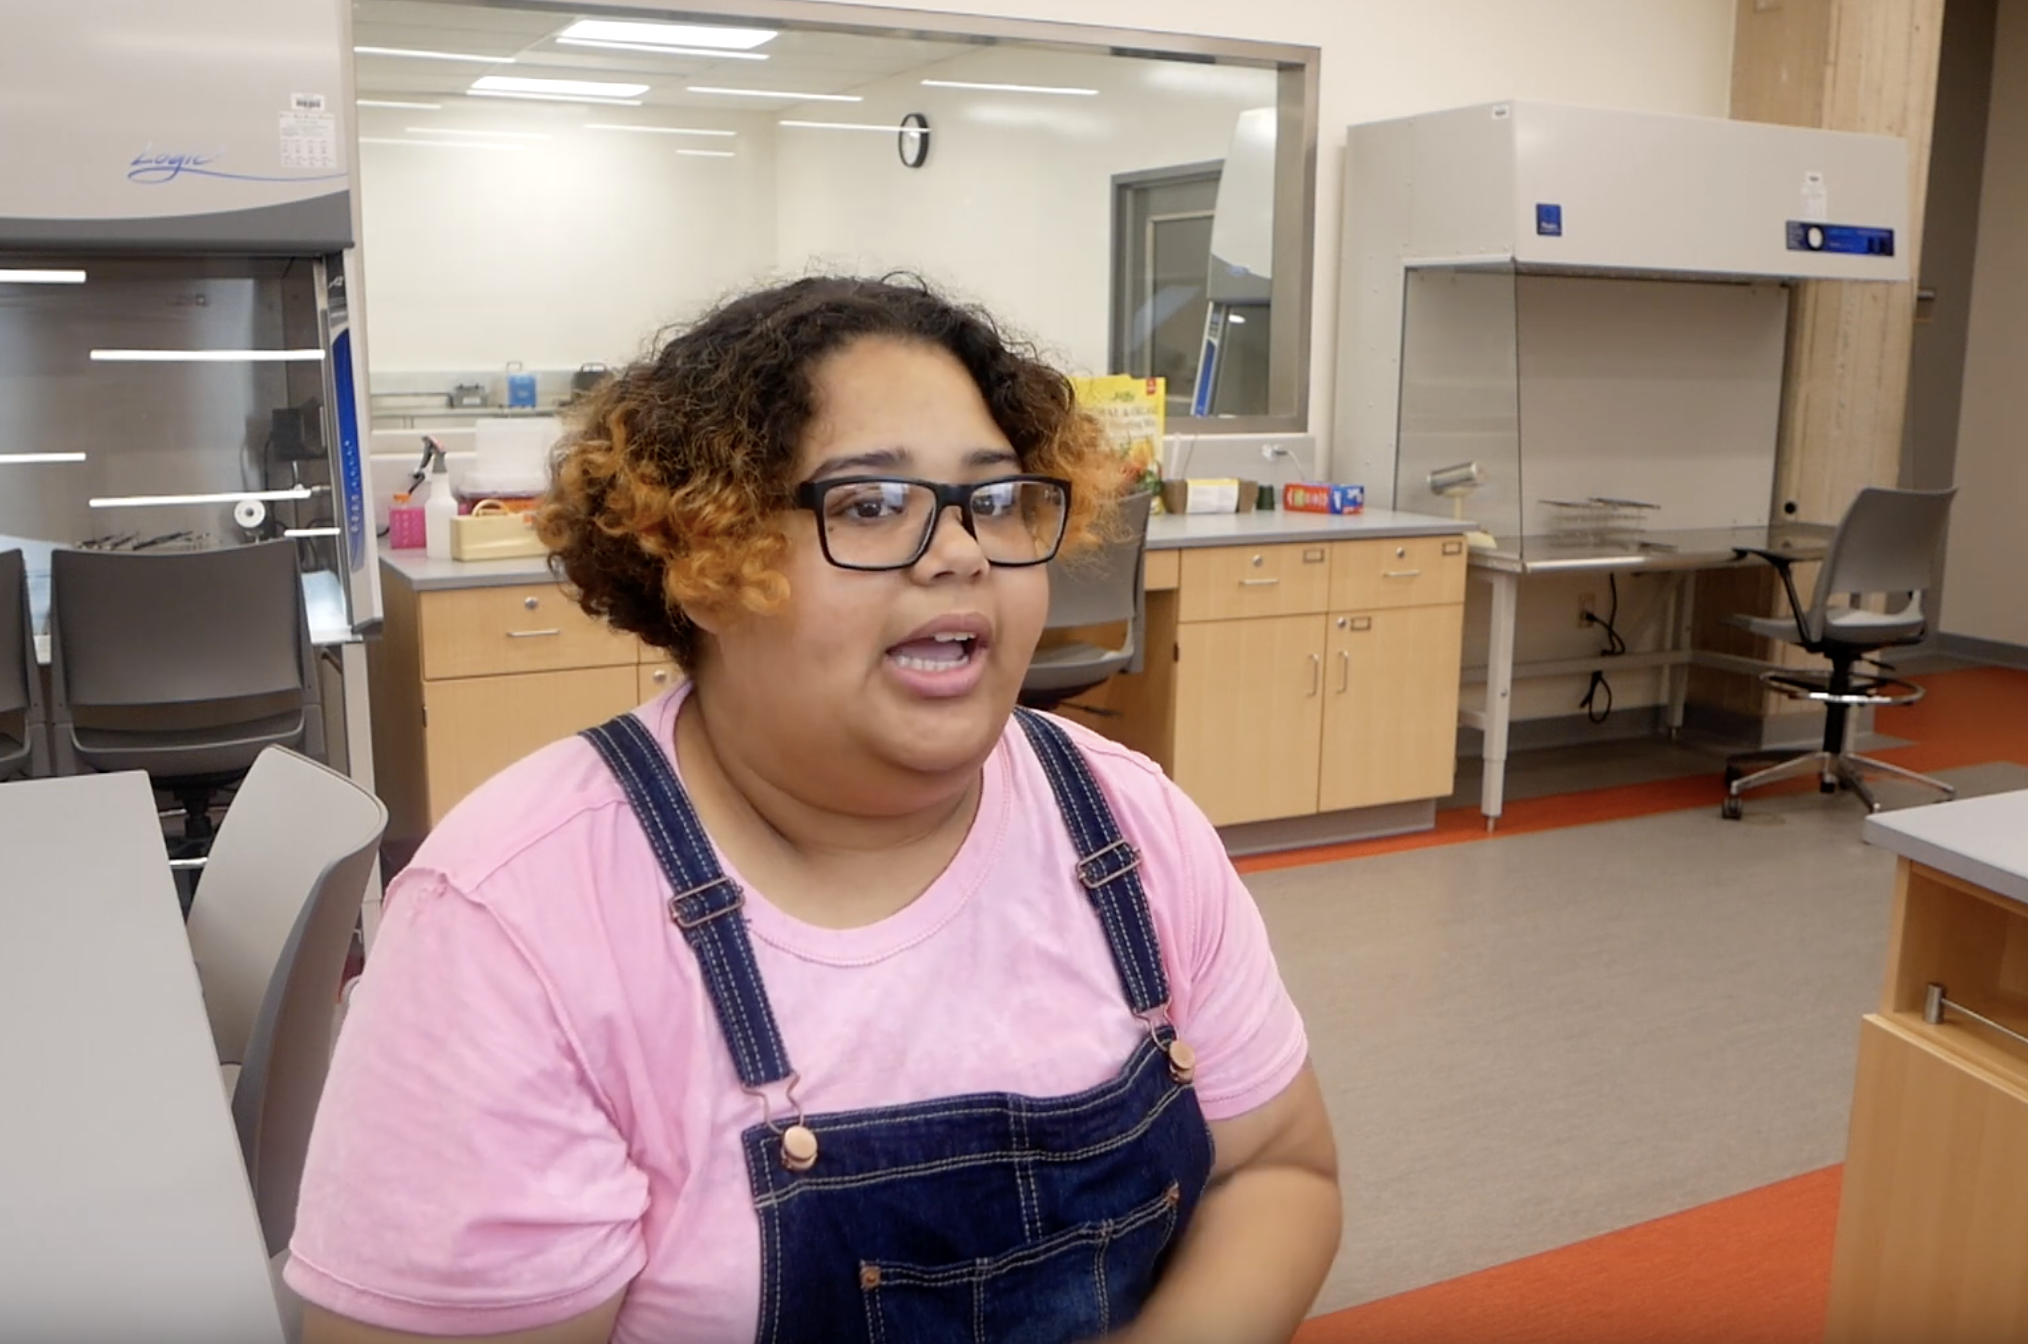 A photo of Kaishla Cabrera speaking in a lab. She is wearing a pink t-shirt and blue overalls, and glasses.